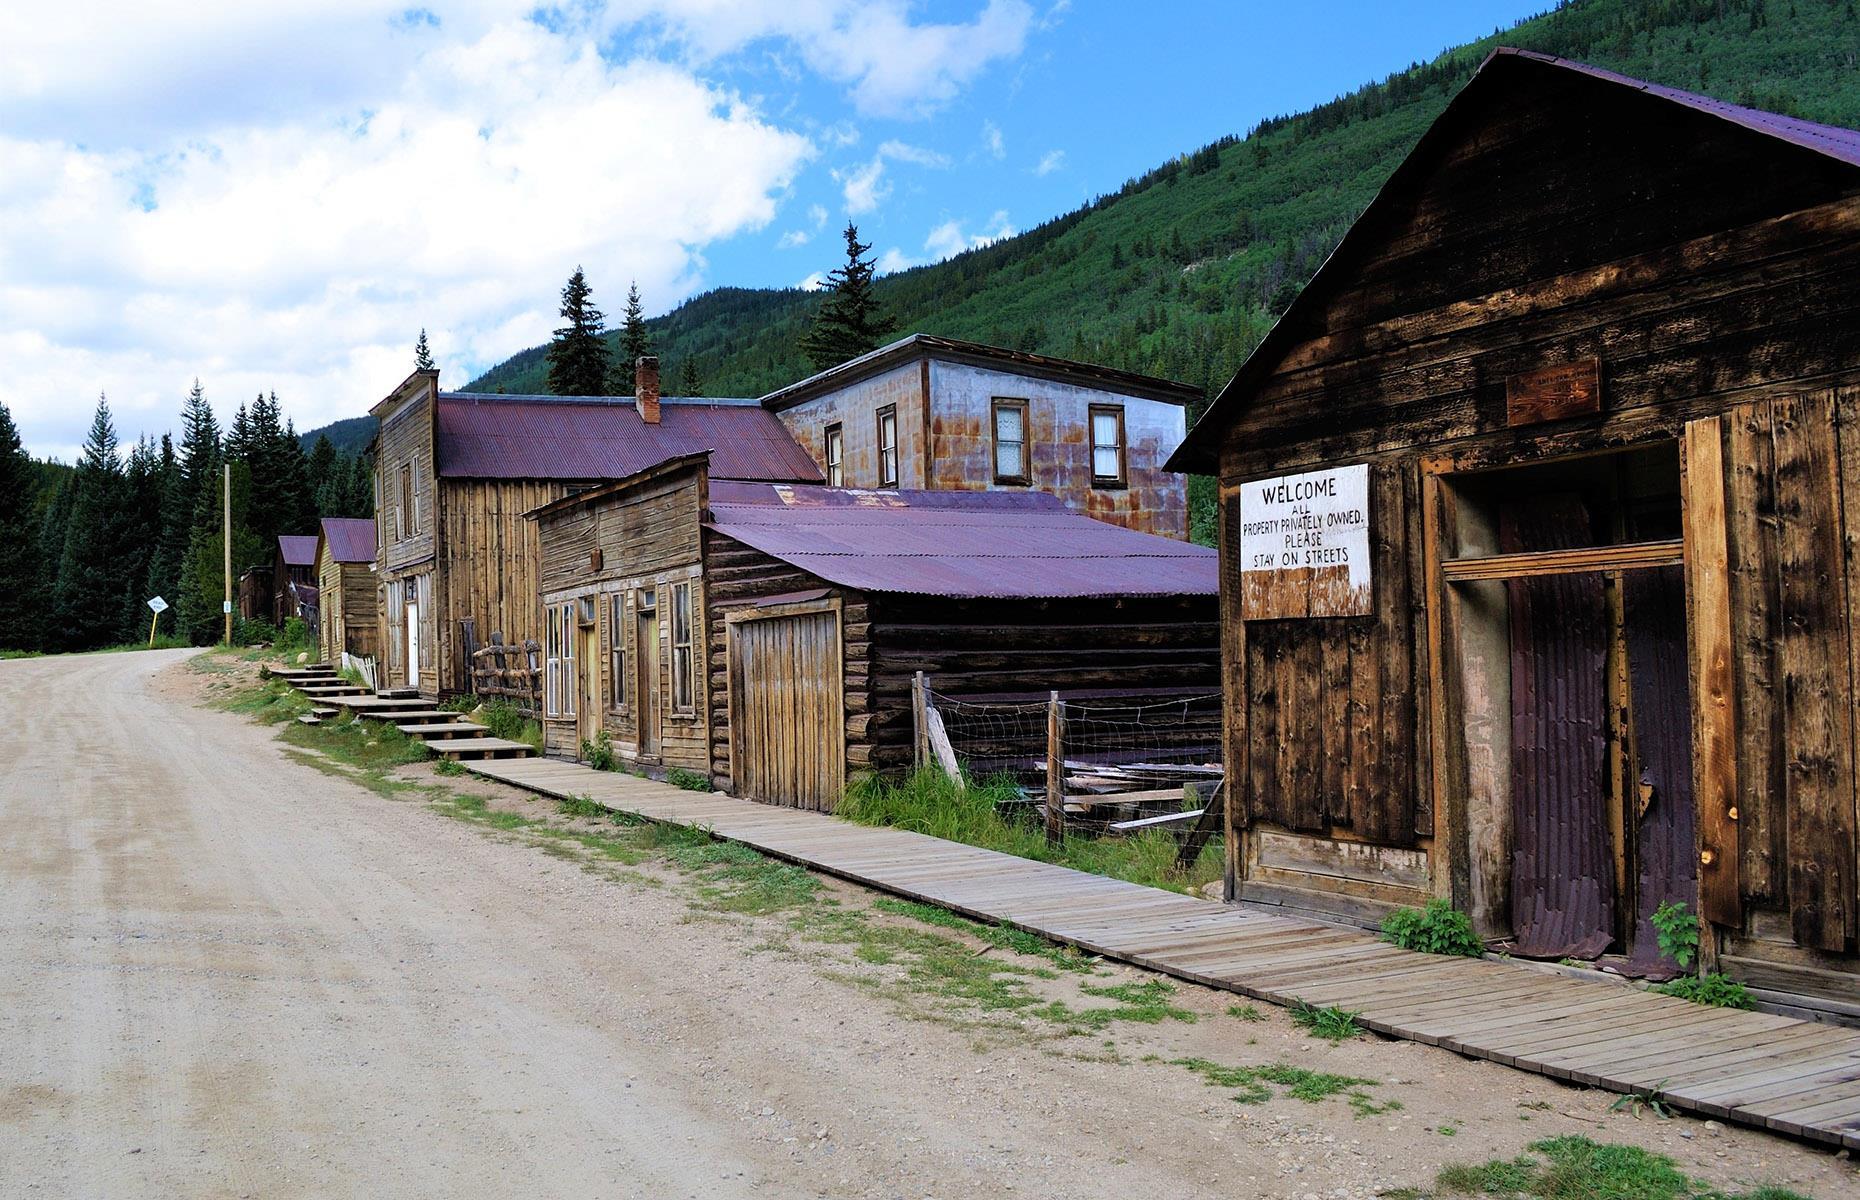 America is thick with ghost towns, from long-forgotten mining camps abandoned in a hurry to moldering former villages wrecked by fire or flood. But which state has the most? Geotab has mapped the USA's ghost towns from coast to coast – so read on to discover where America's deserted settlements can be found and learn some fascinating history along the way.